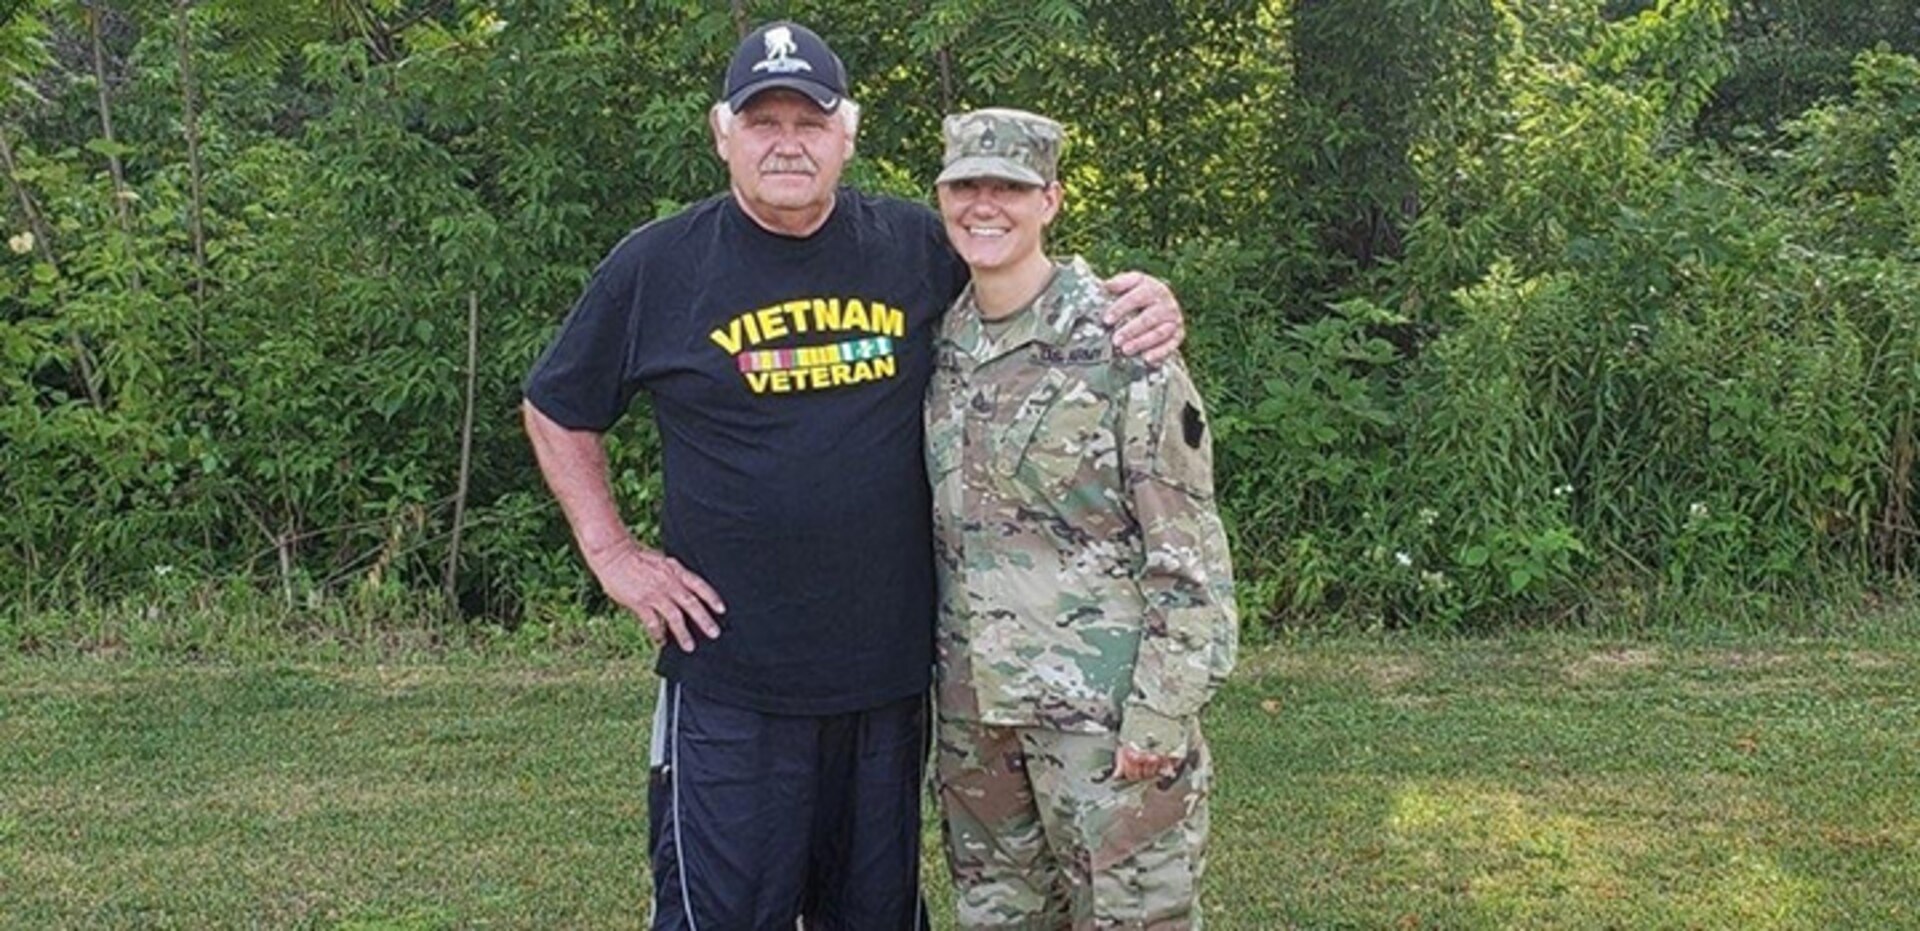 Vietnam veteran John Schilinski and his daughter, Staff Sgt. Rachel Kovach, a squad leader with 2nd Platoon, Company A, 1st Battalion, 112th infantry Regiment, 56th Stryker Brigade Combat Team, 28th Infantry Division, share an afternoon together comparing experiences with the military.